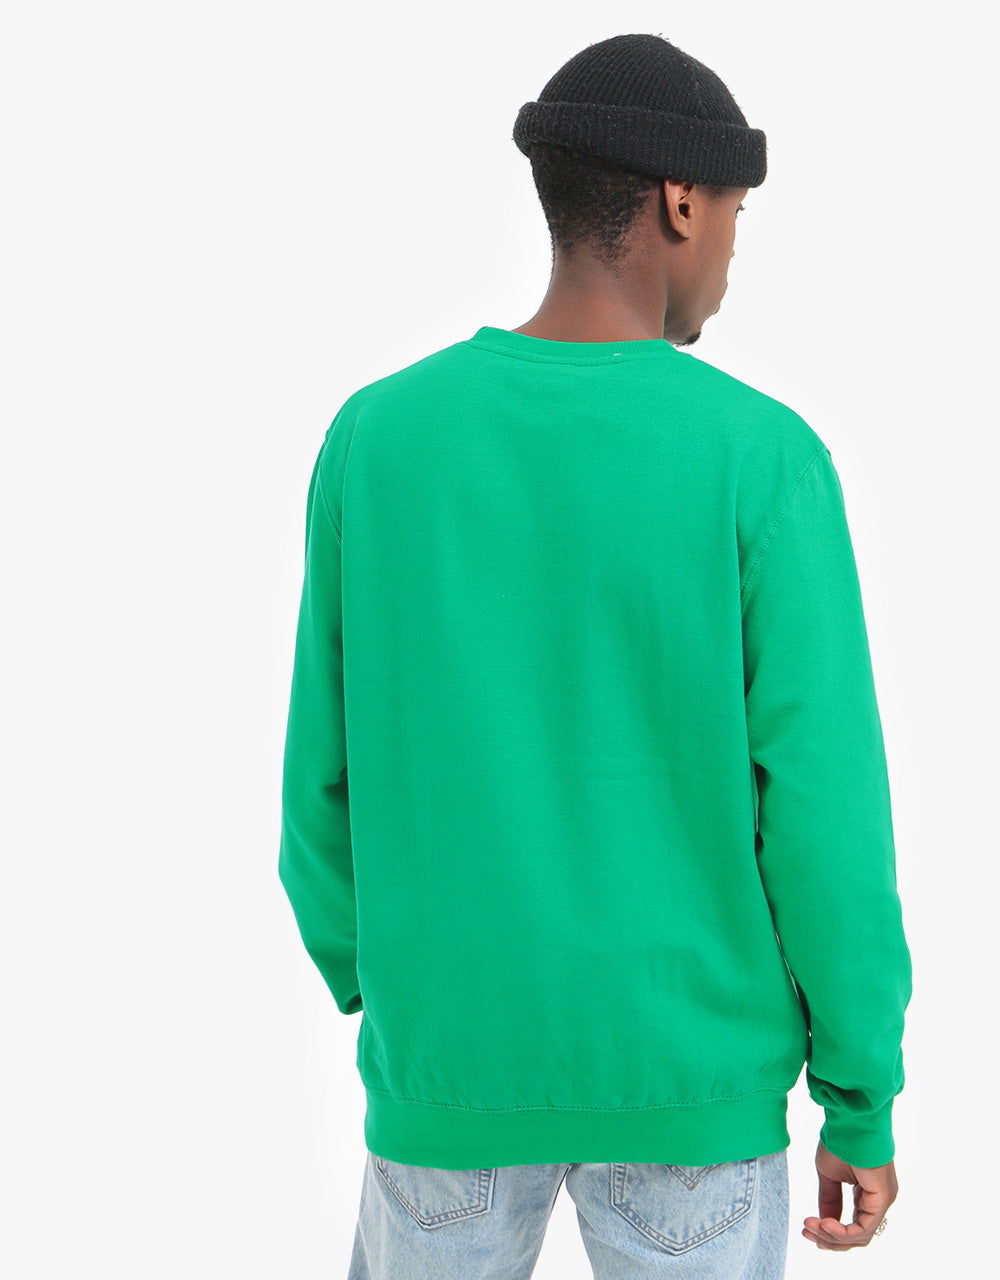 Route One Daised Sweatshirt - Kelly Green